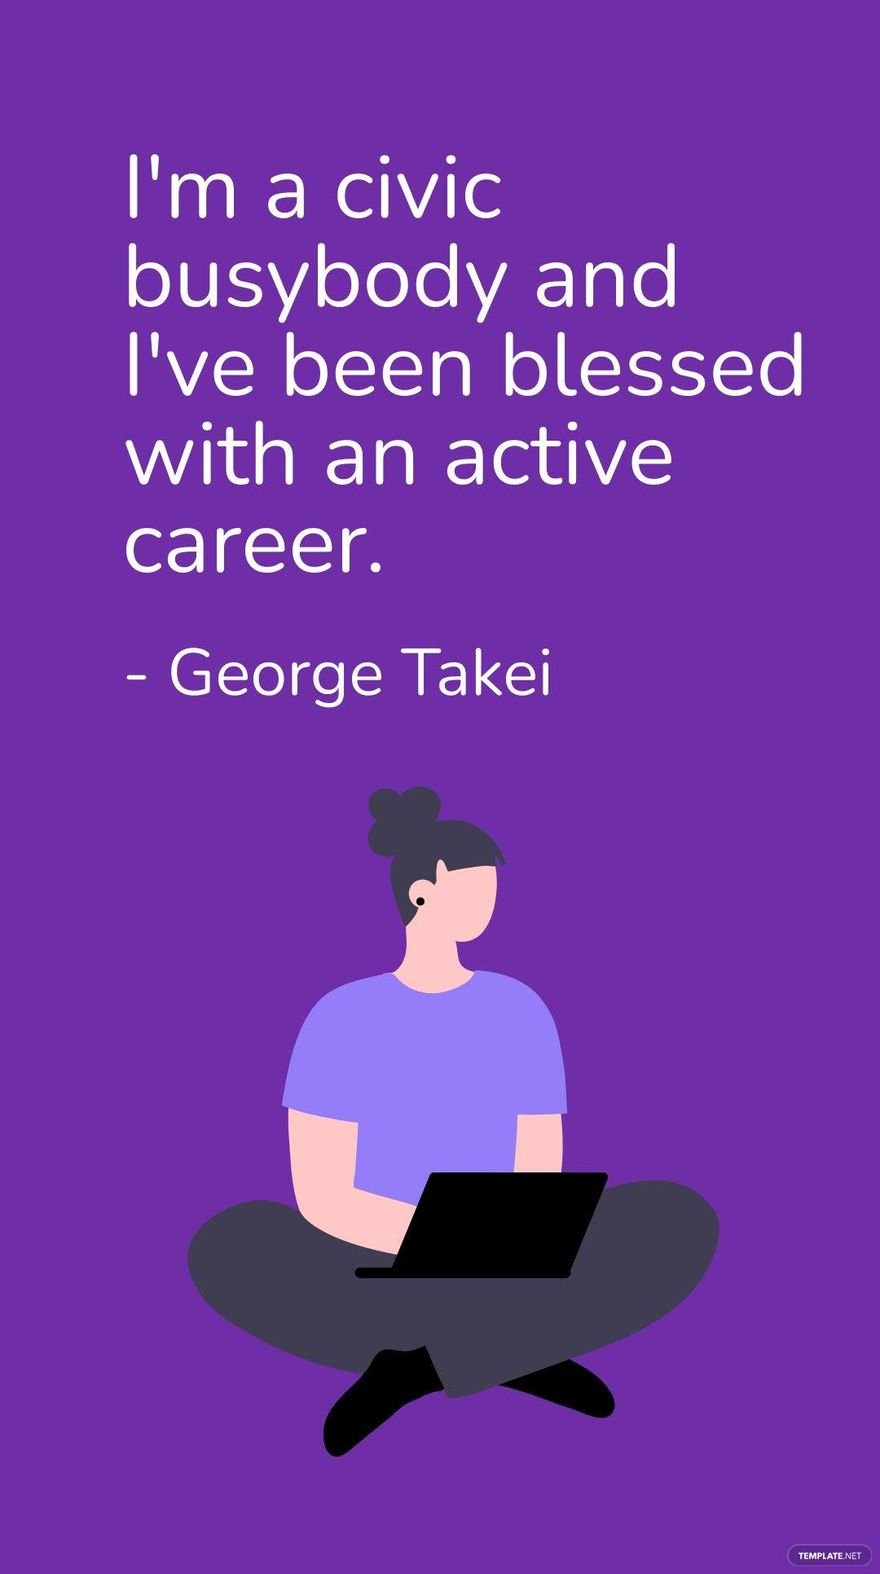 Free George Takei - I'm a civic busybody and I've been blessed with an active career.